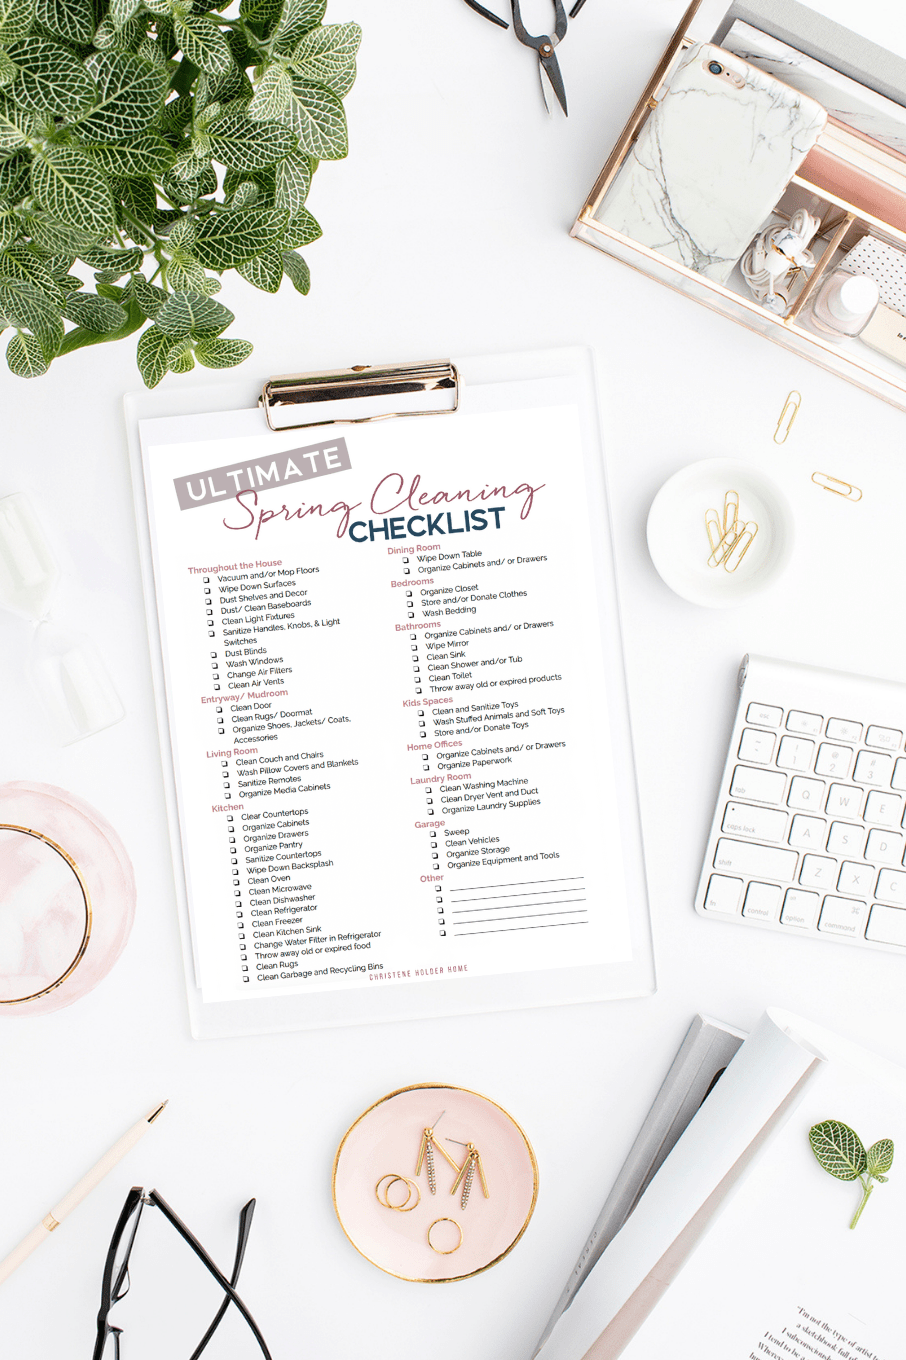 How to Spring Clean Your Home + Free Printable Checklist